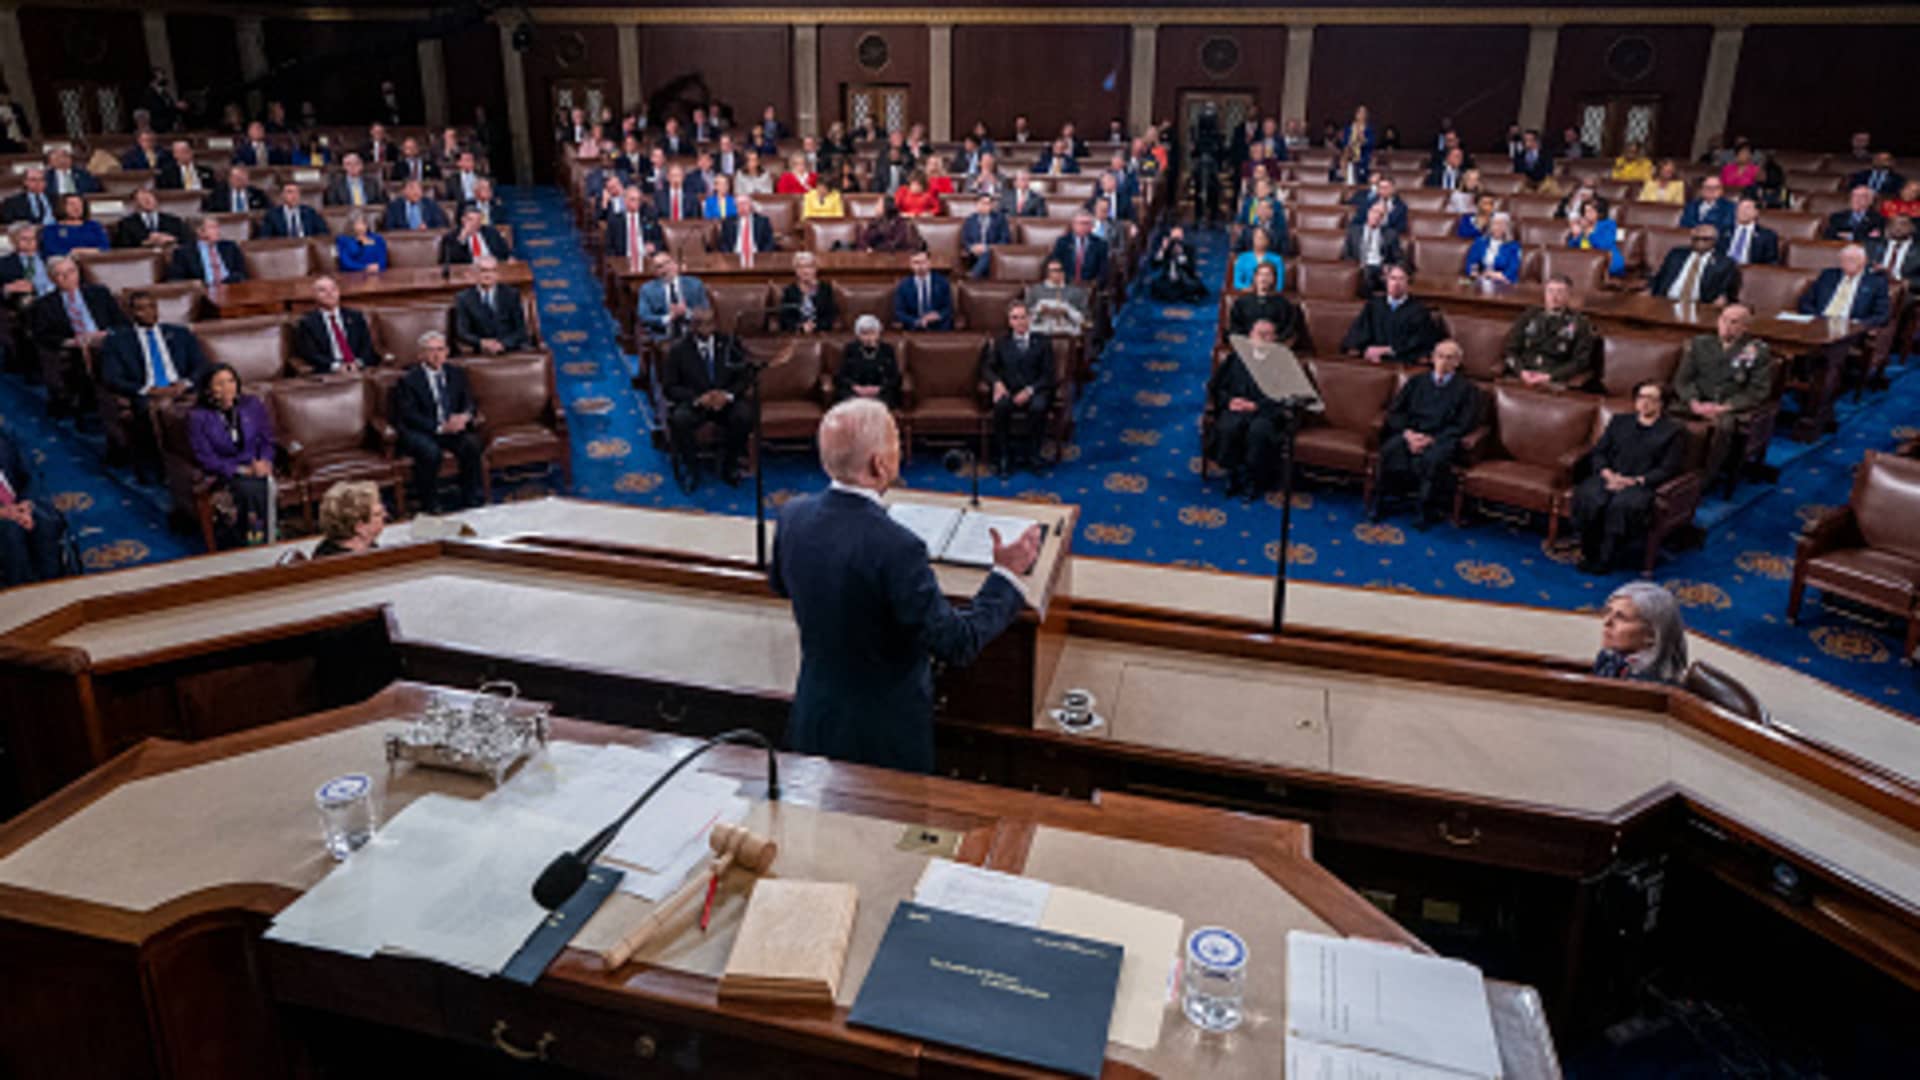 President Joe Biden delivers the State of the Union address before a joint session of Congress on March 1, 2022 in Washington.